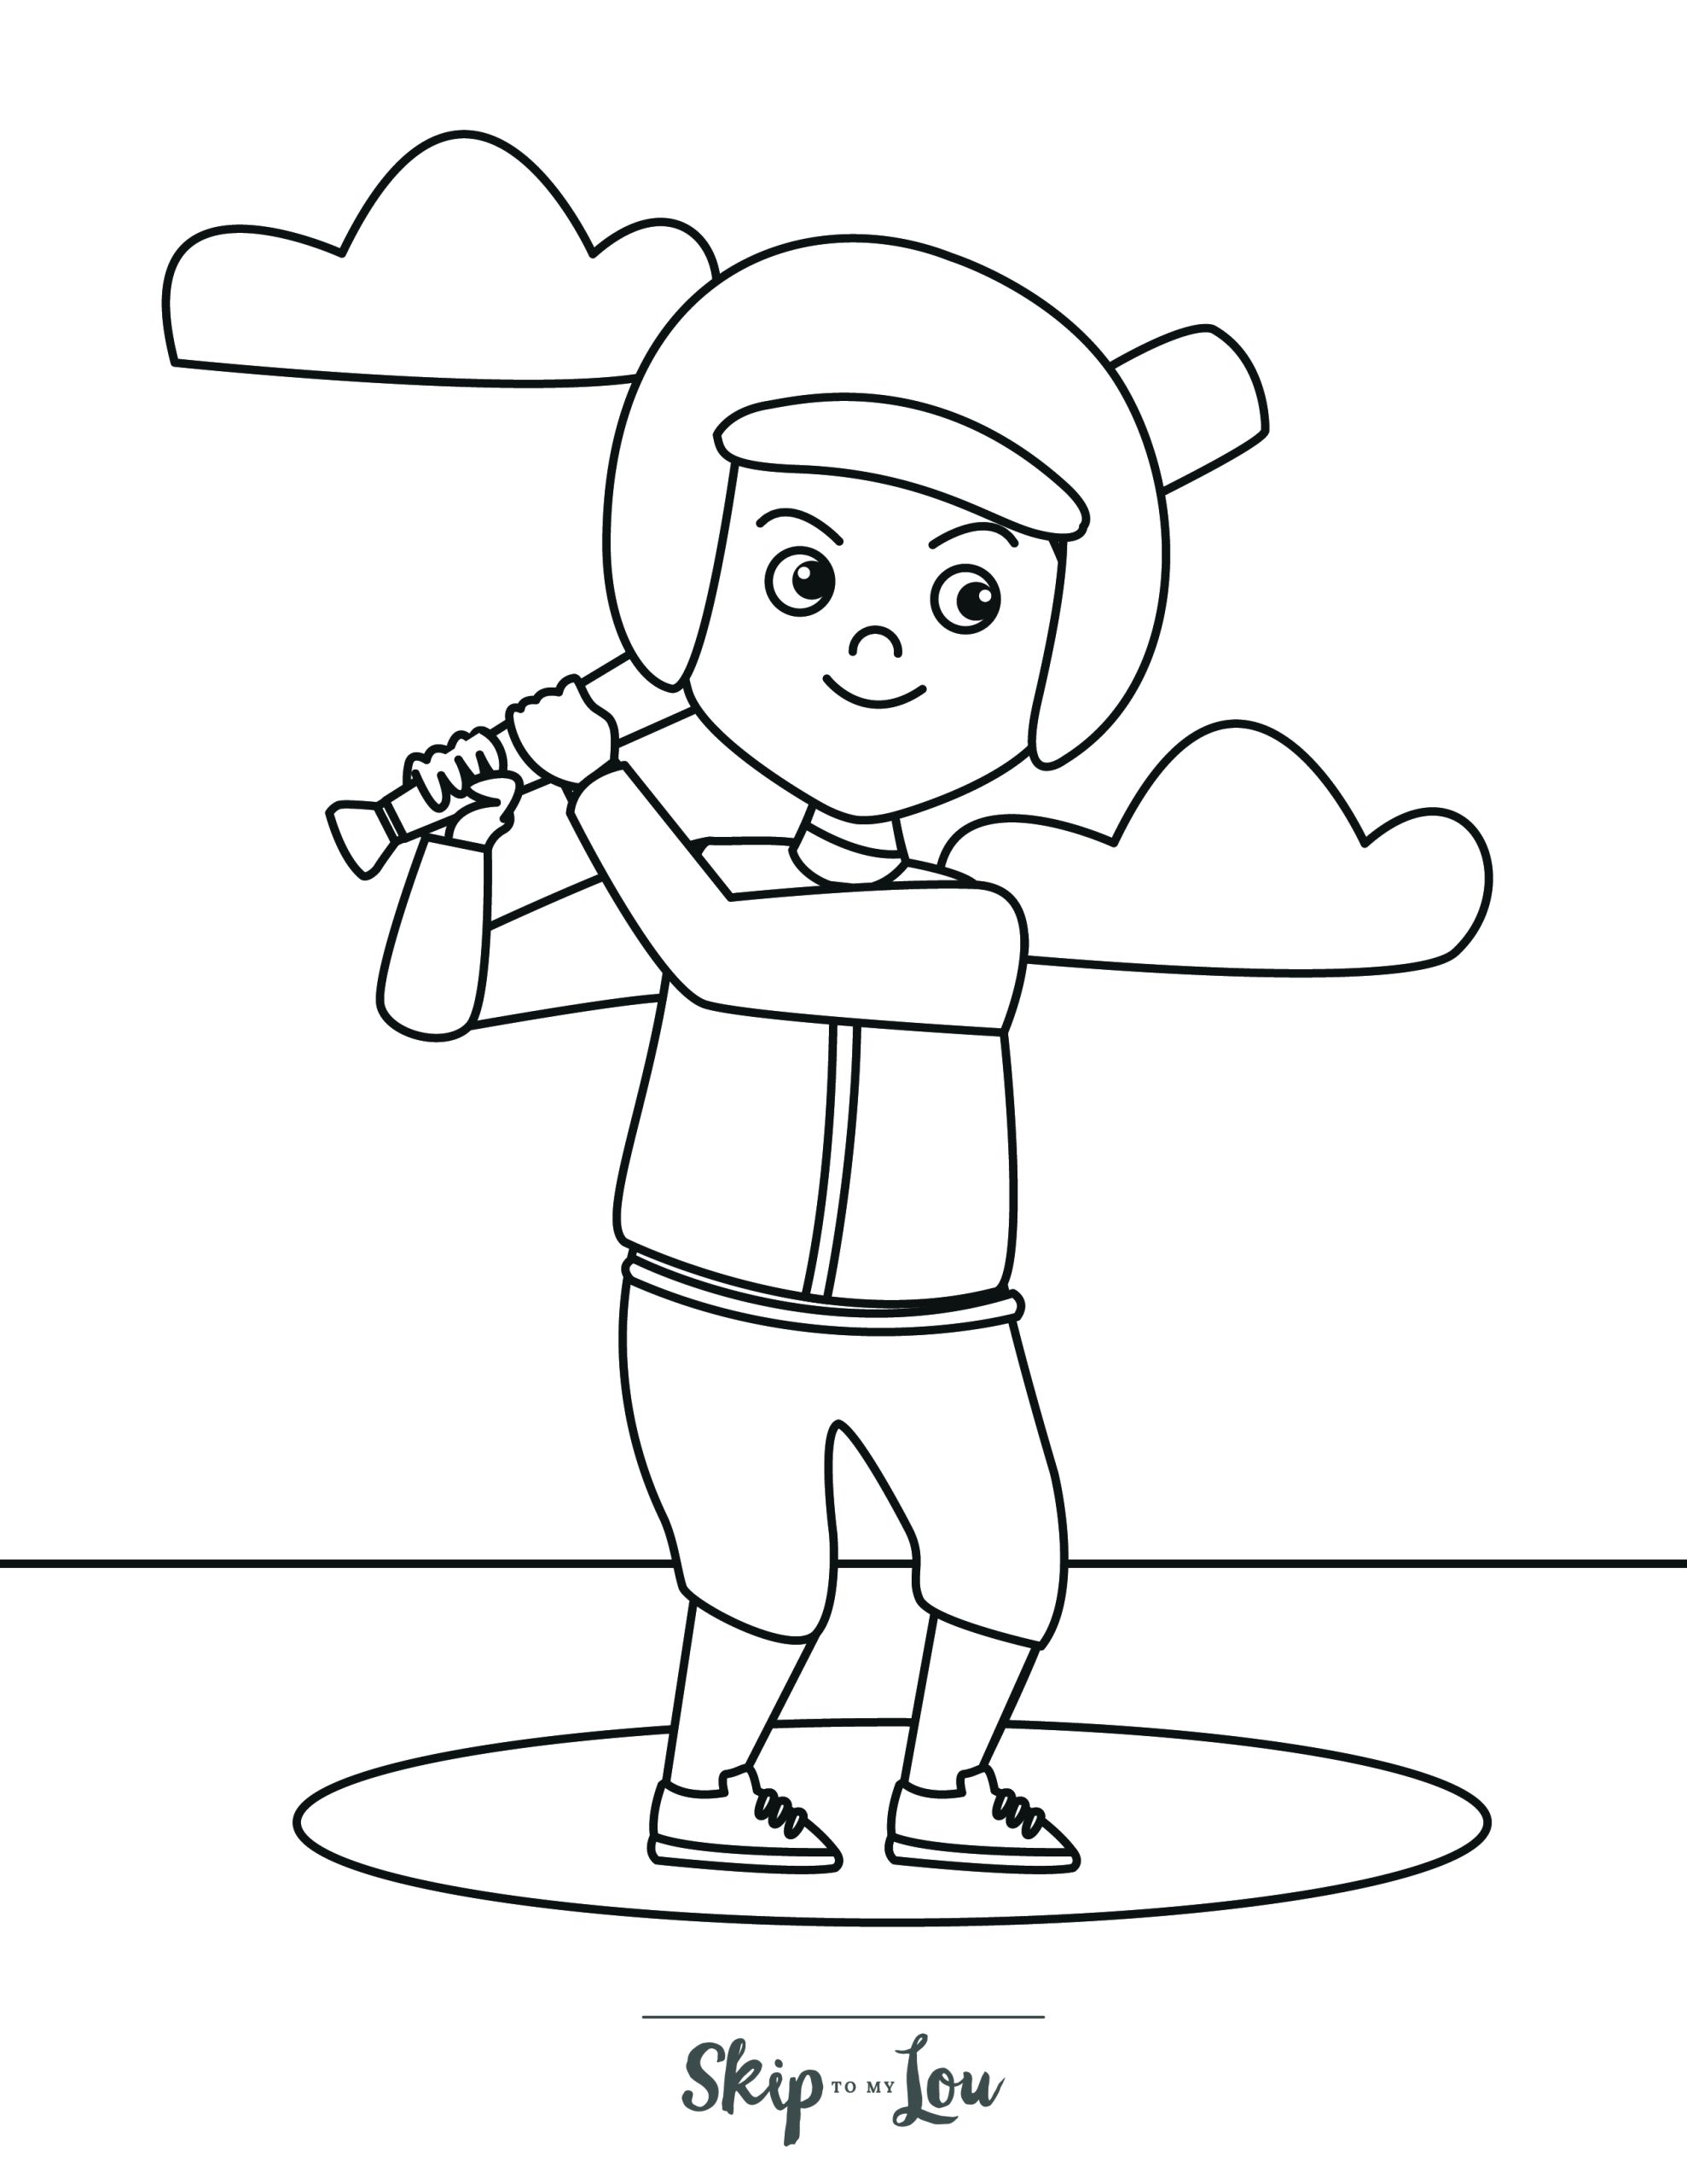 Skip to my Lou - Baseball Coloring Pages - A line drawing of a baseball player ready to hit the ball.